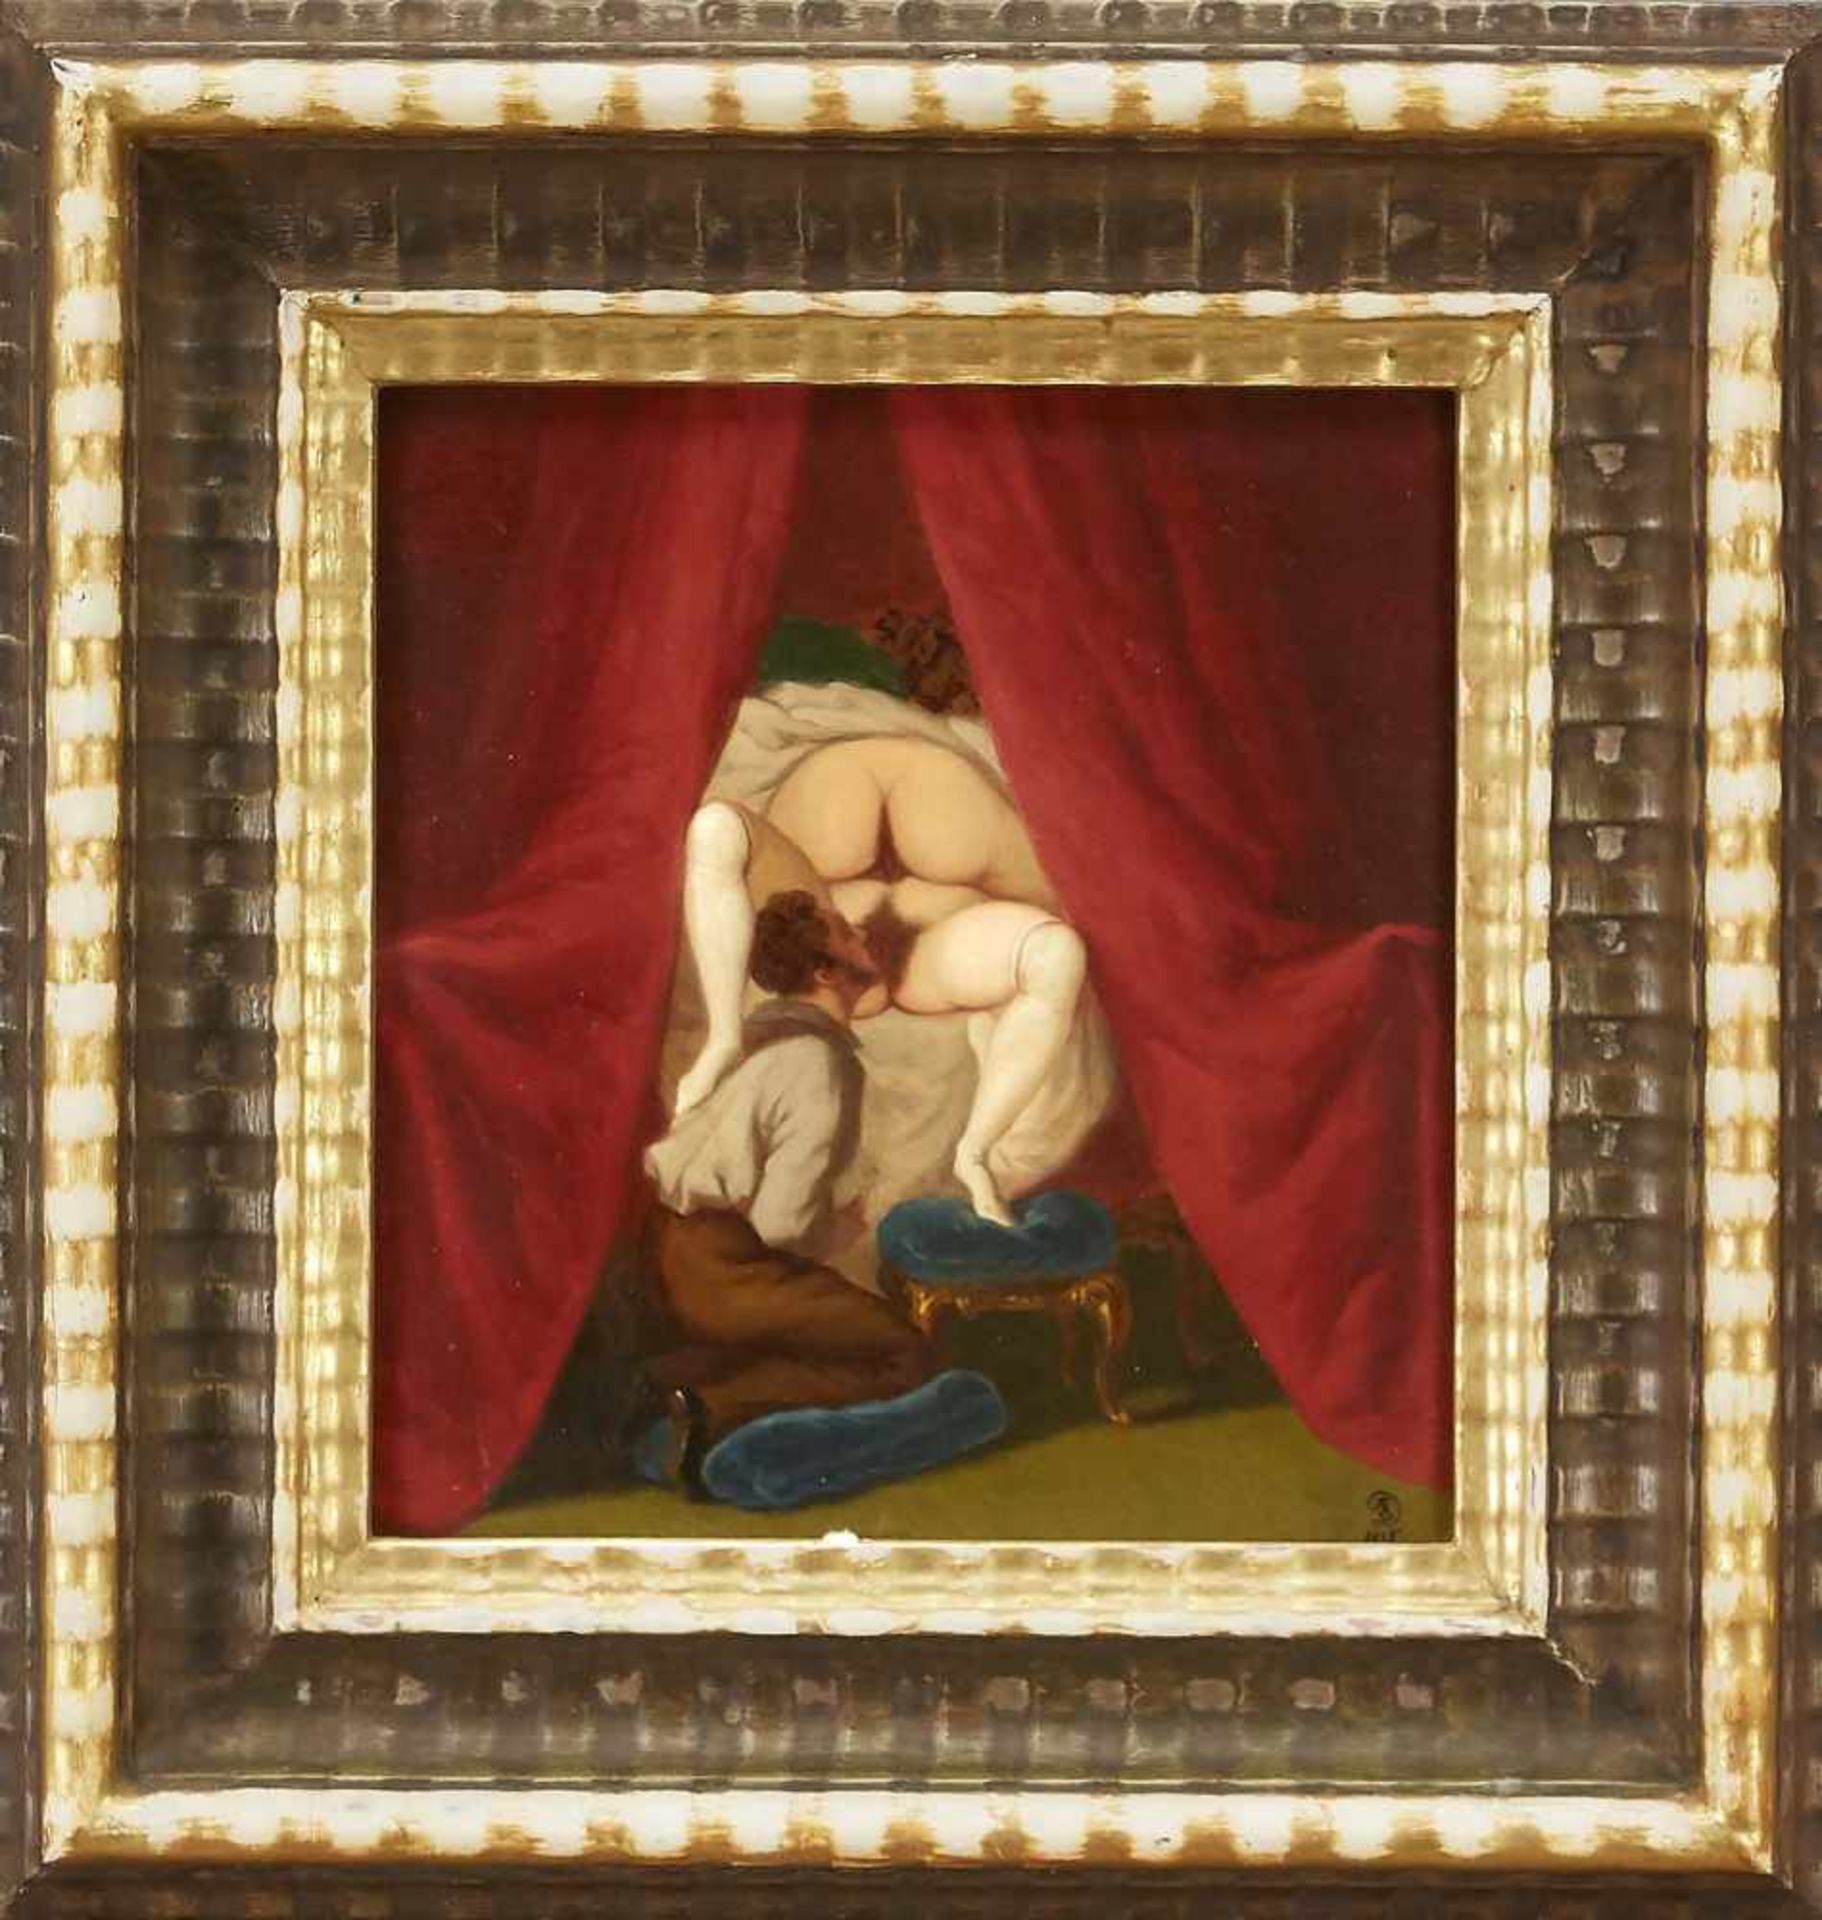 19th century artist, love in a threesome, oil on canvas (relined), erotic subject in the